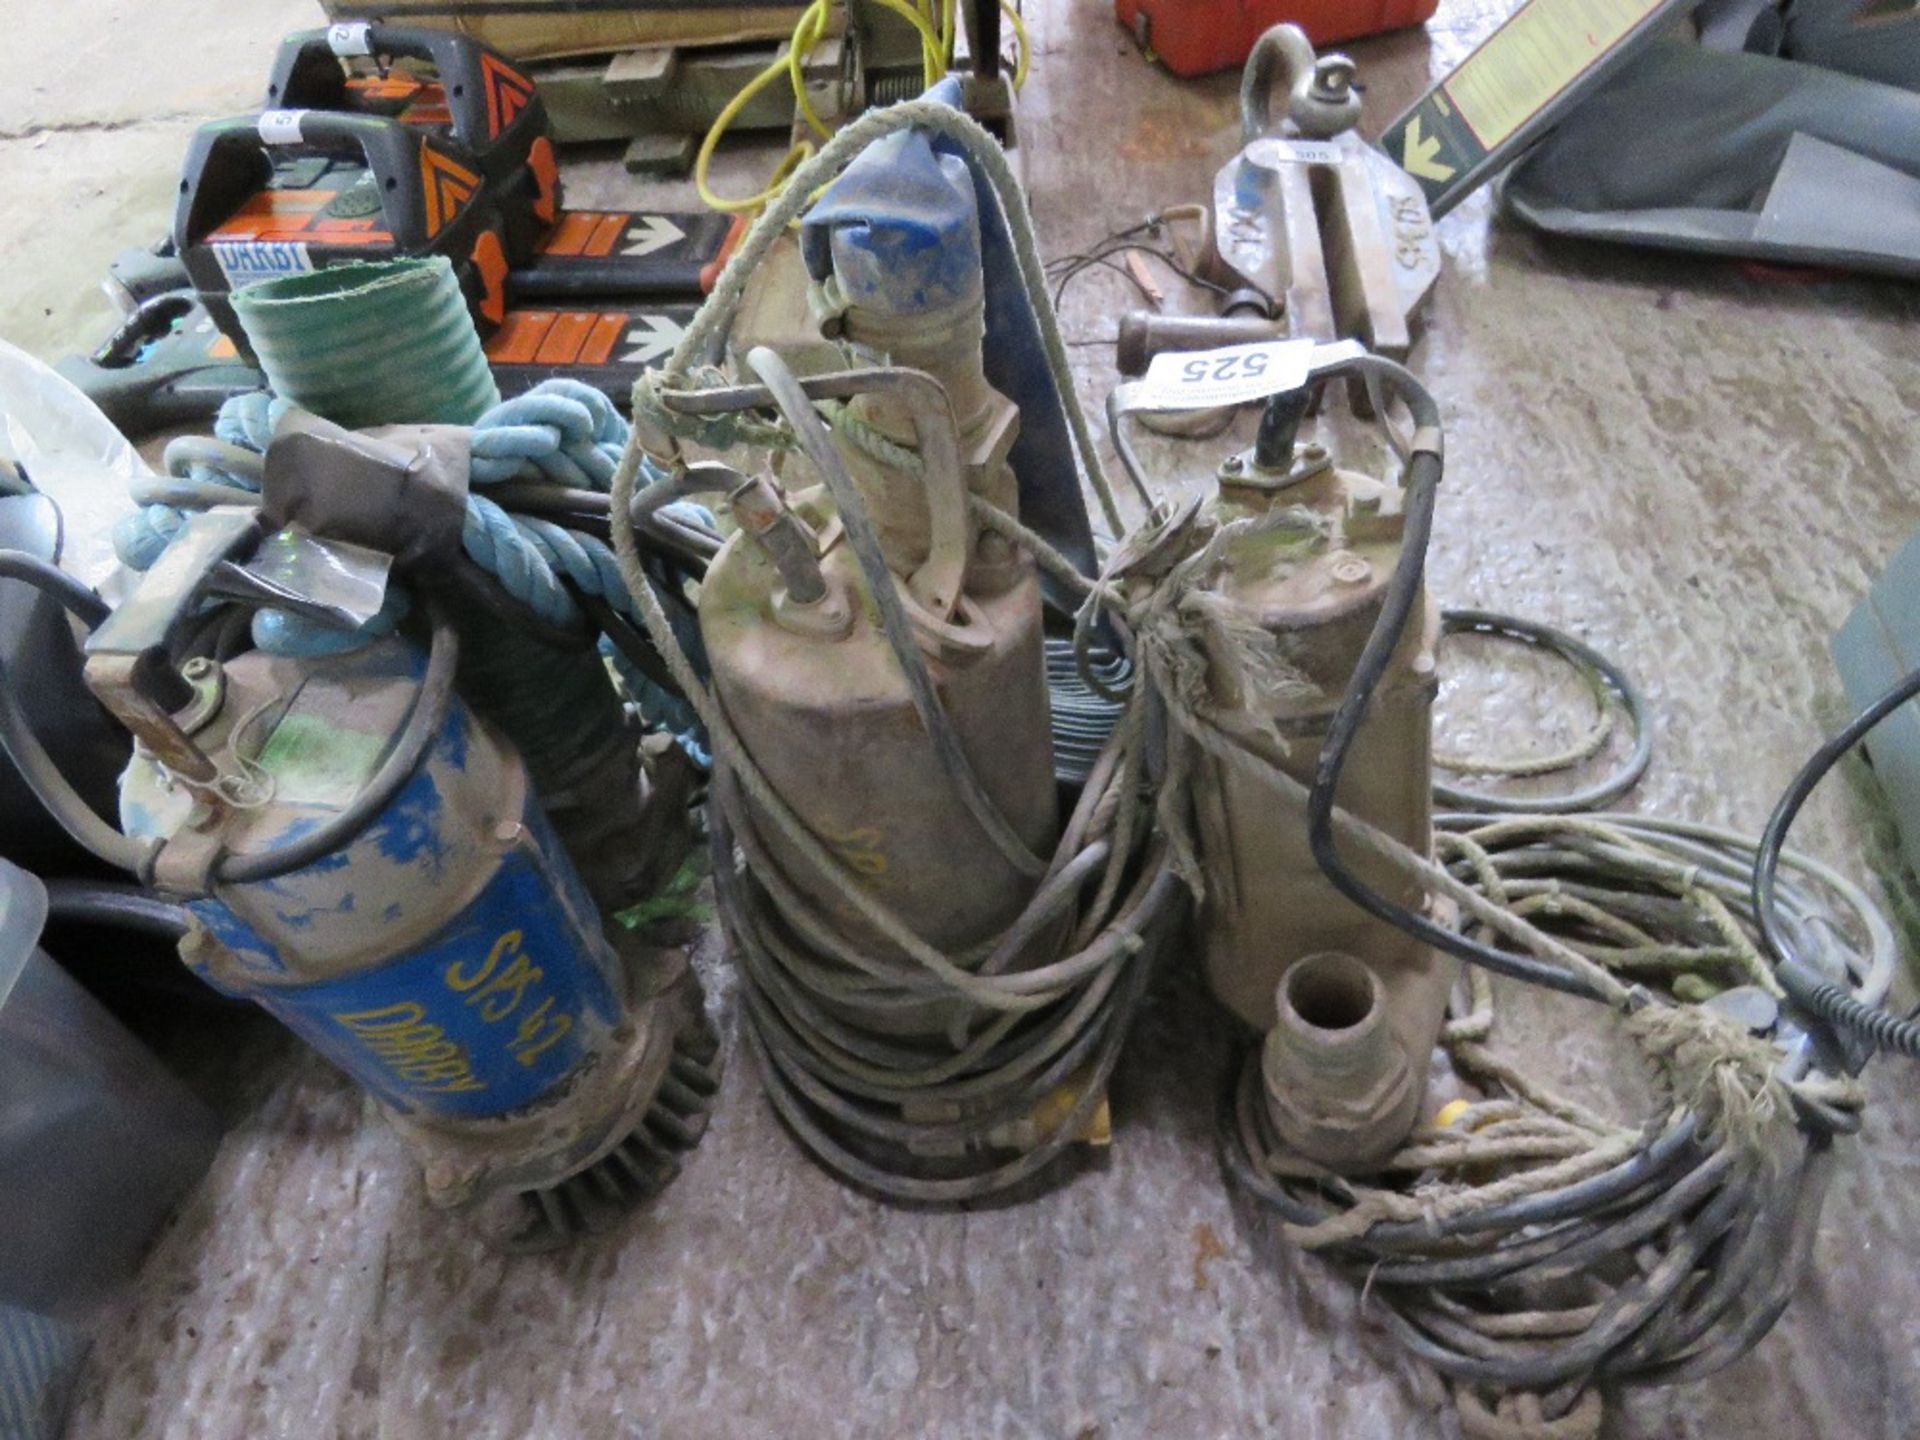 3 X SUBMERSIBLE WATER PUMPS. DIRECT FROM A LOCAL GROUNDWORKS COMPANY AS PART OF THEIR RESTRUCTURI - Image 2 of 2